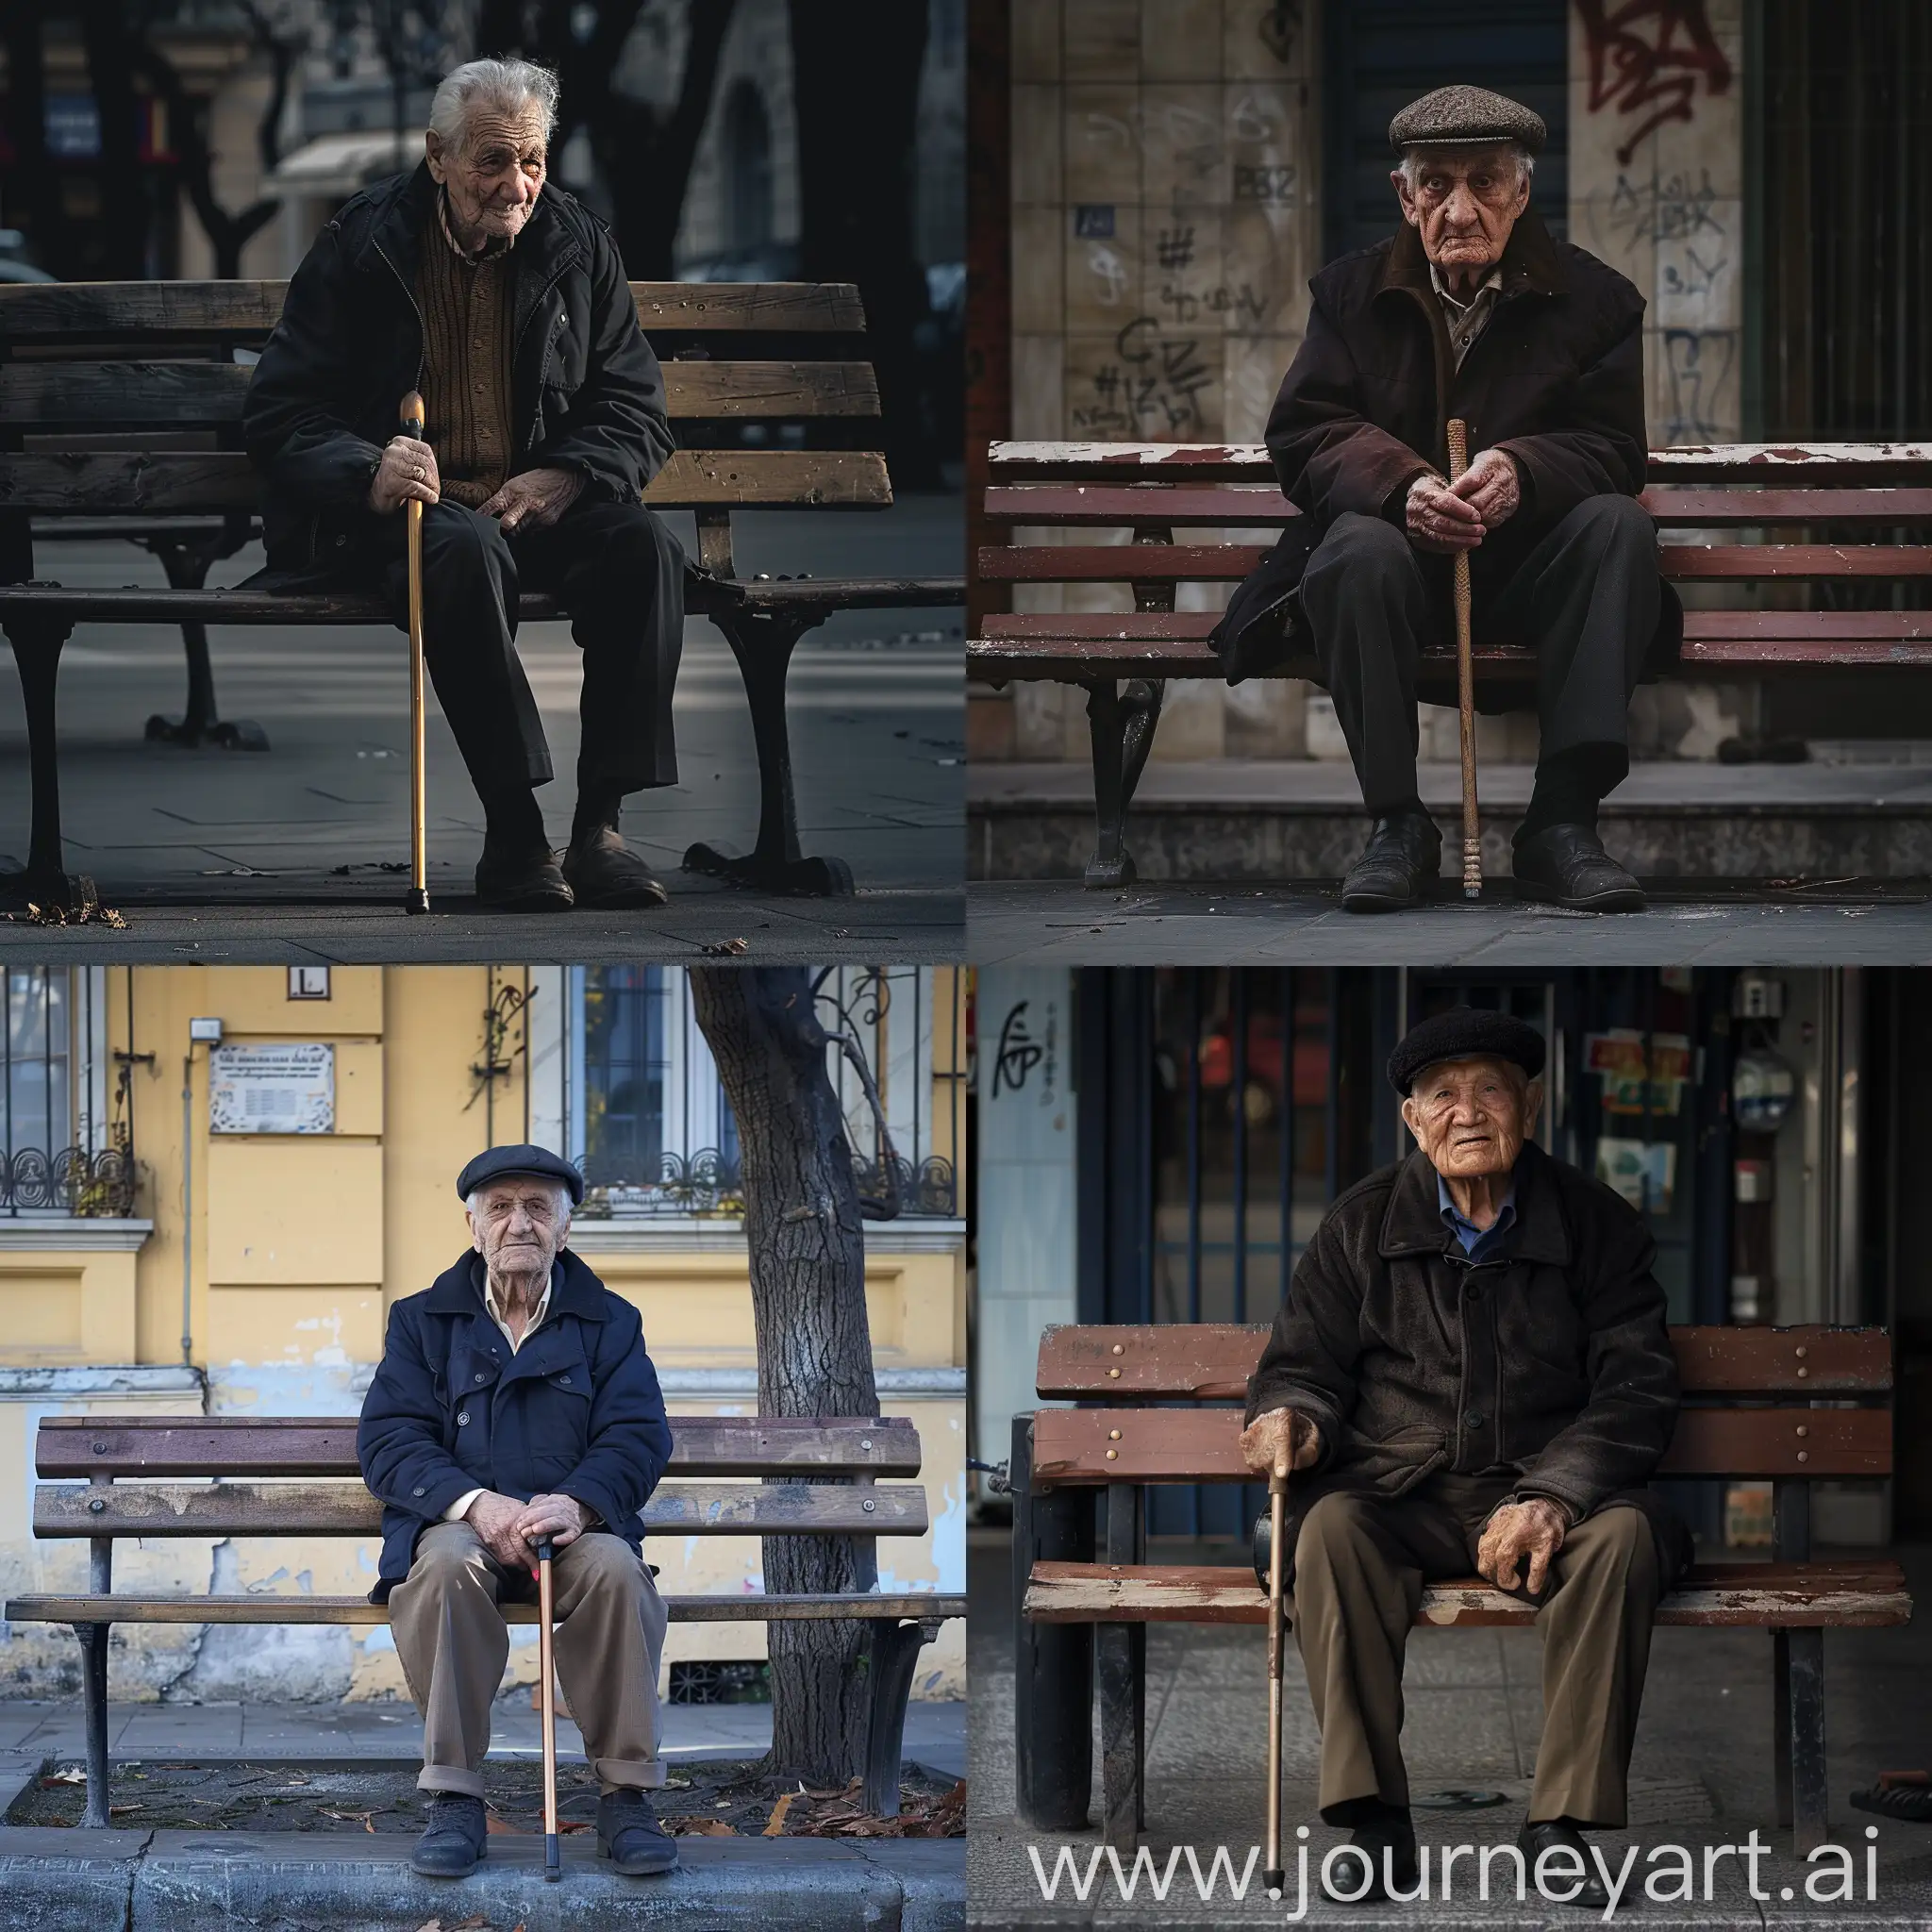 A photo of an old man sitting on a bench, holding a cane